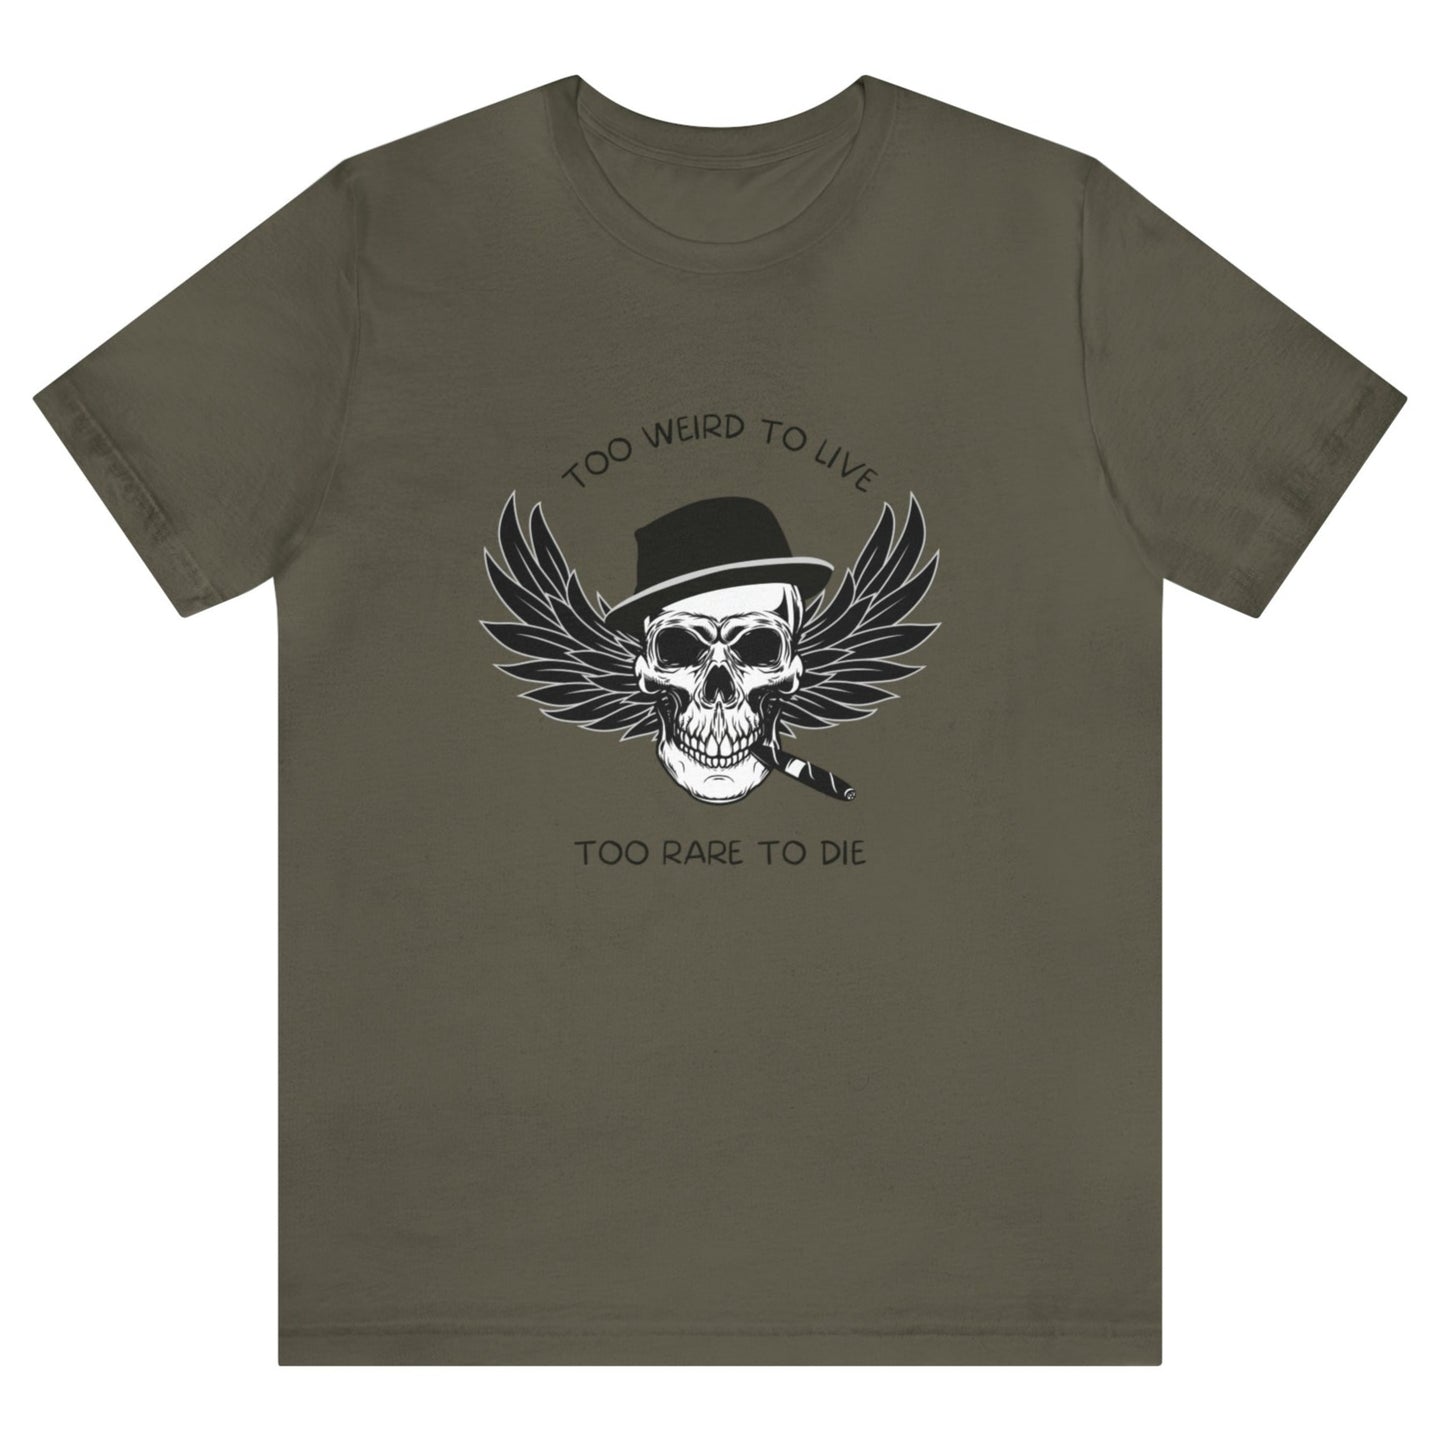 too-weird-to-live-too-rare-to-die-army-t-shirt-with-skull-and-wings